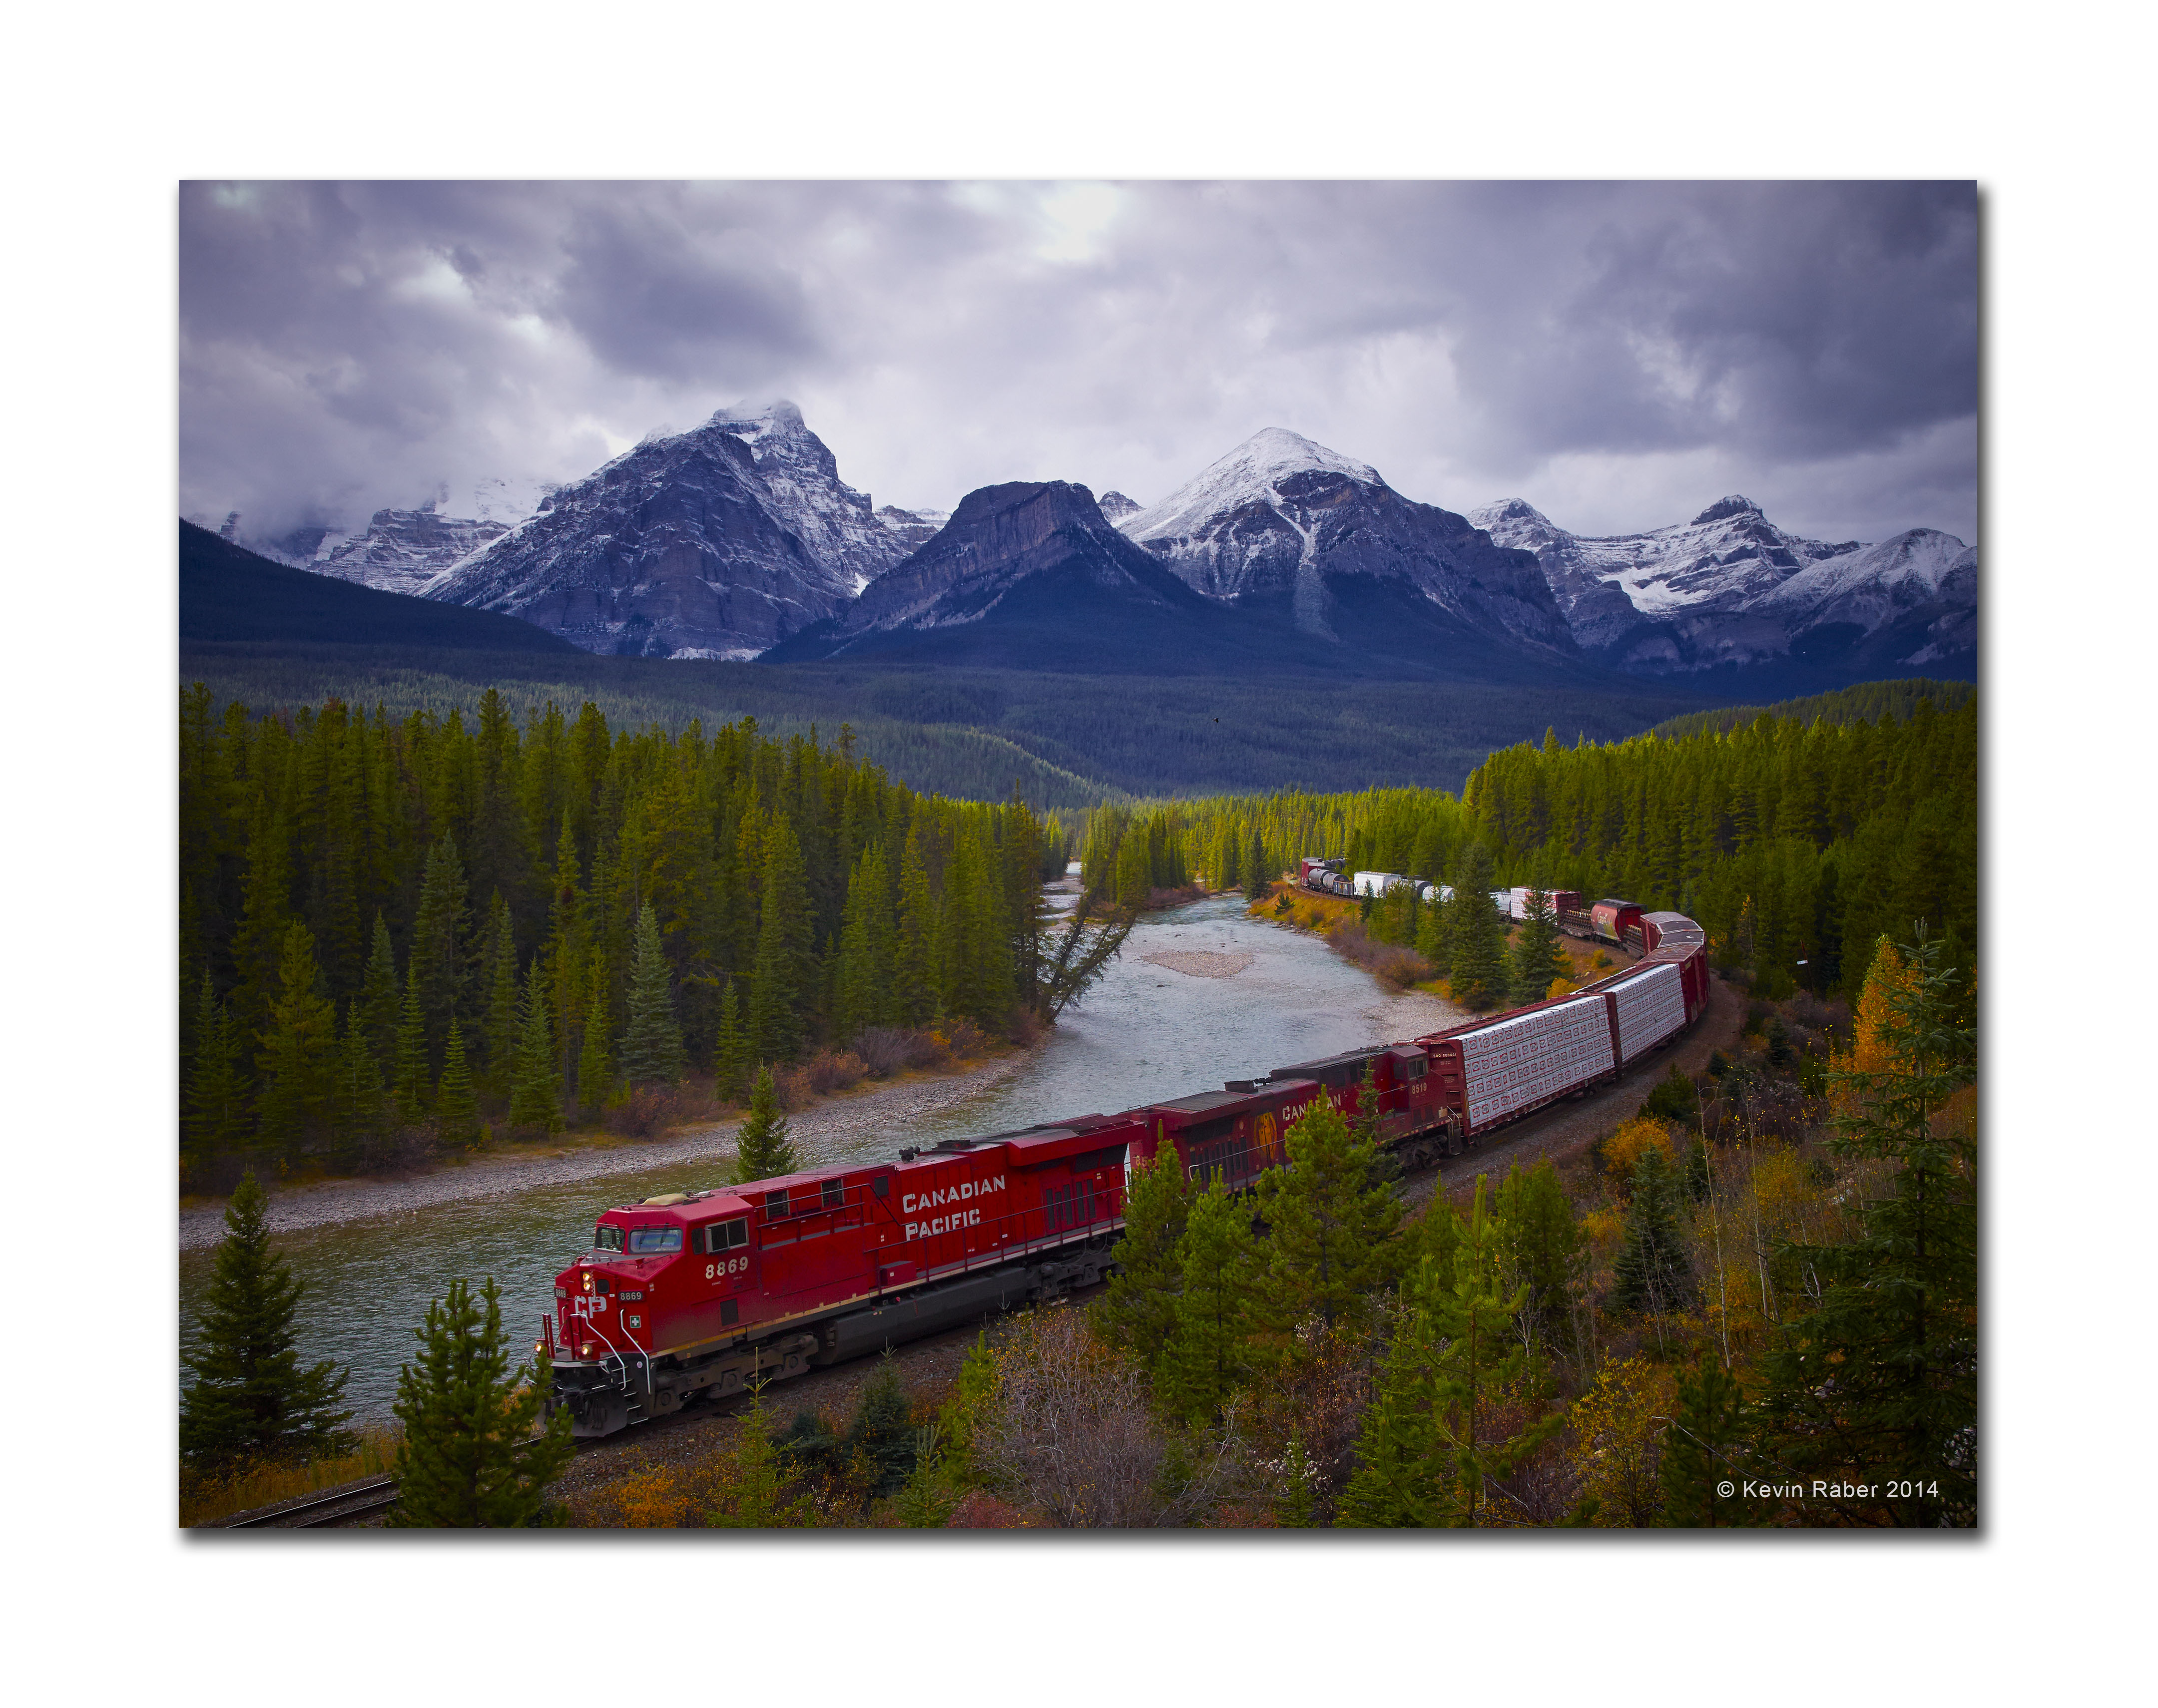 Murrant's Curve, Going South, Canadian Rockies